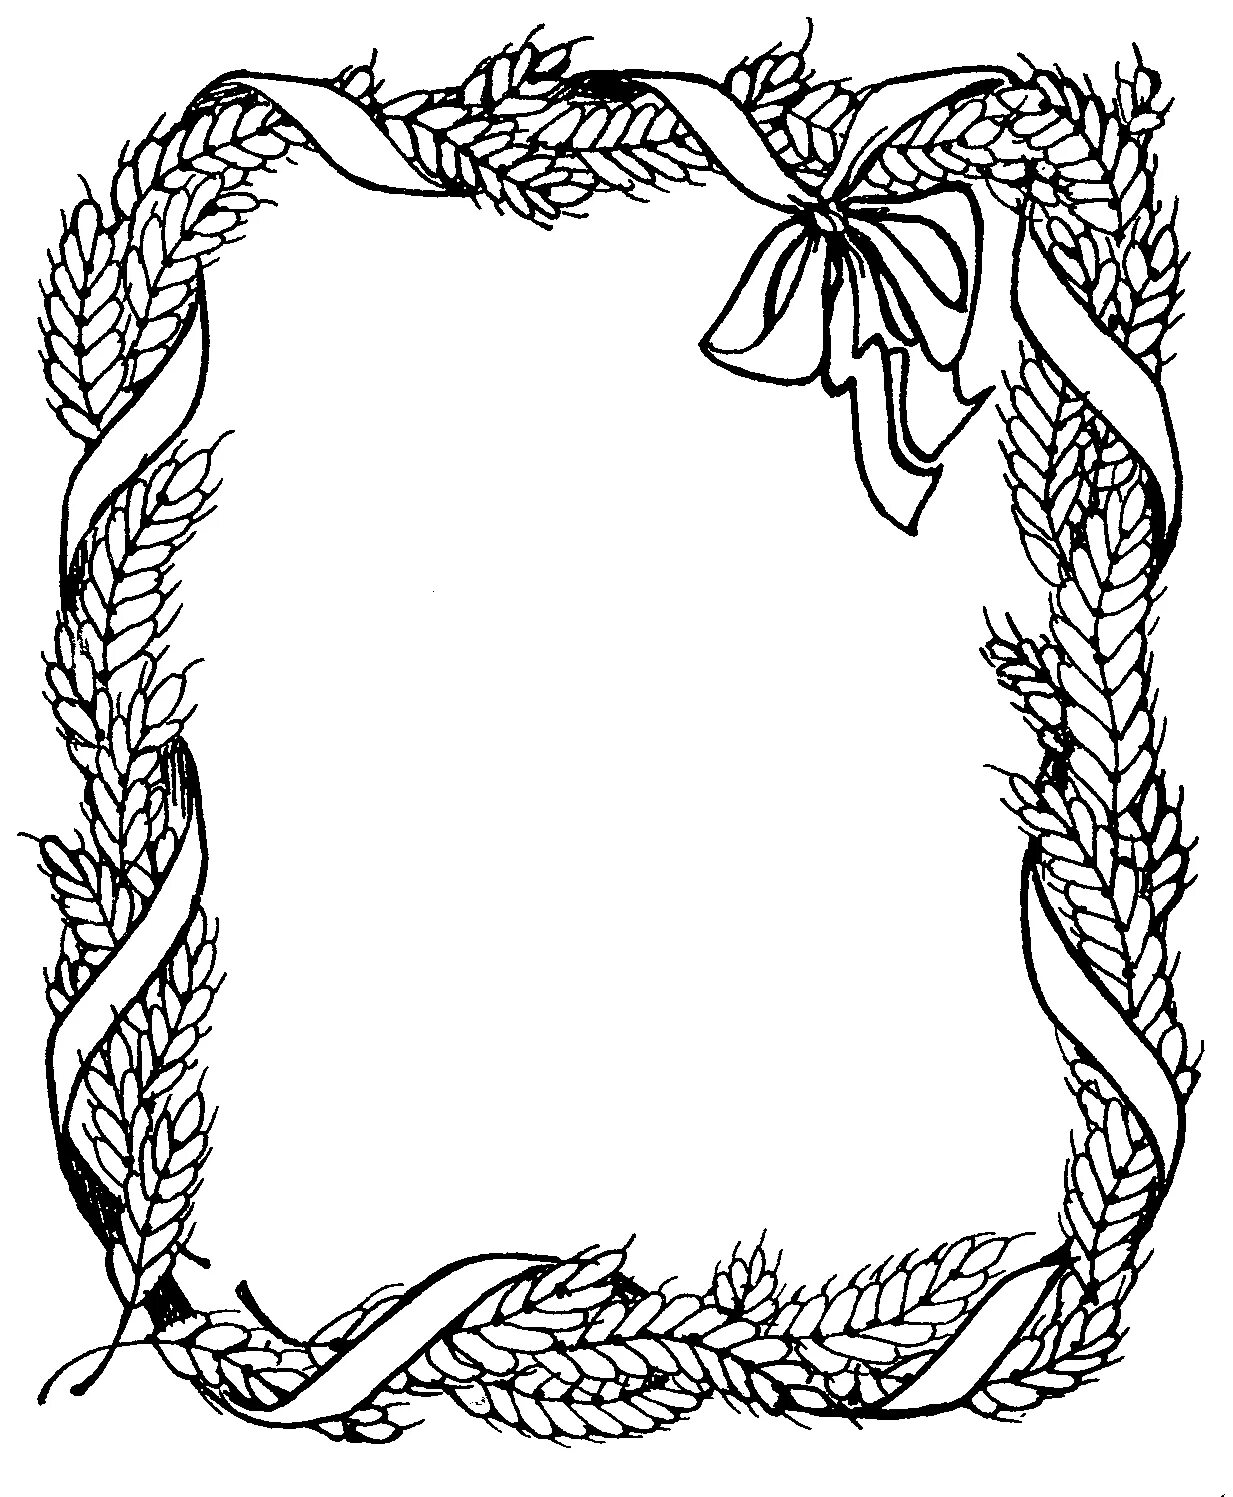 Splendorous coloring page frame February 23